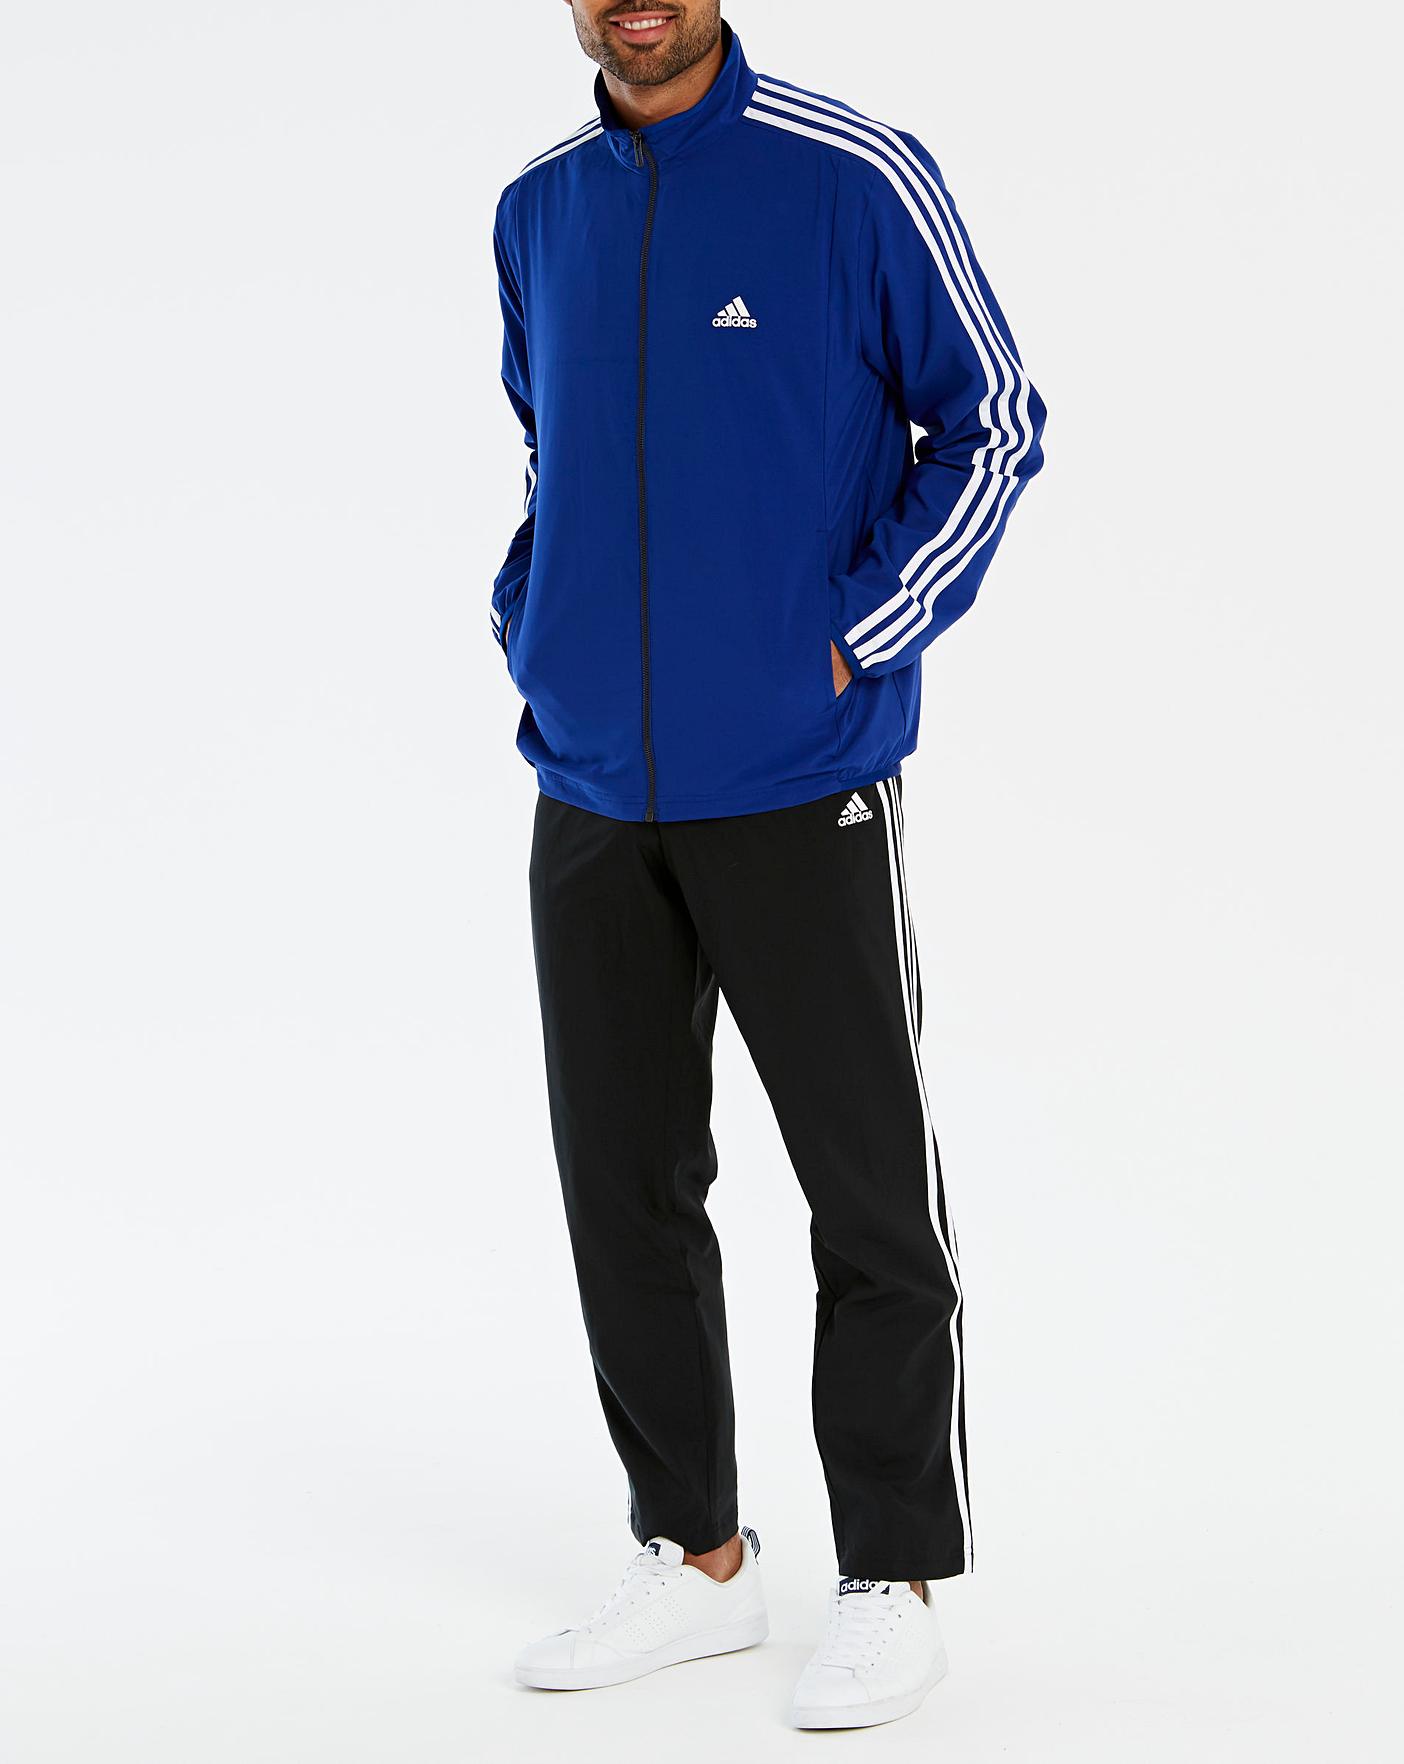 Adidas Woven Light Tracksuit | Crazy Clearance